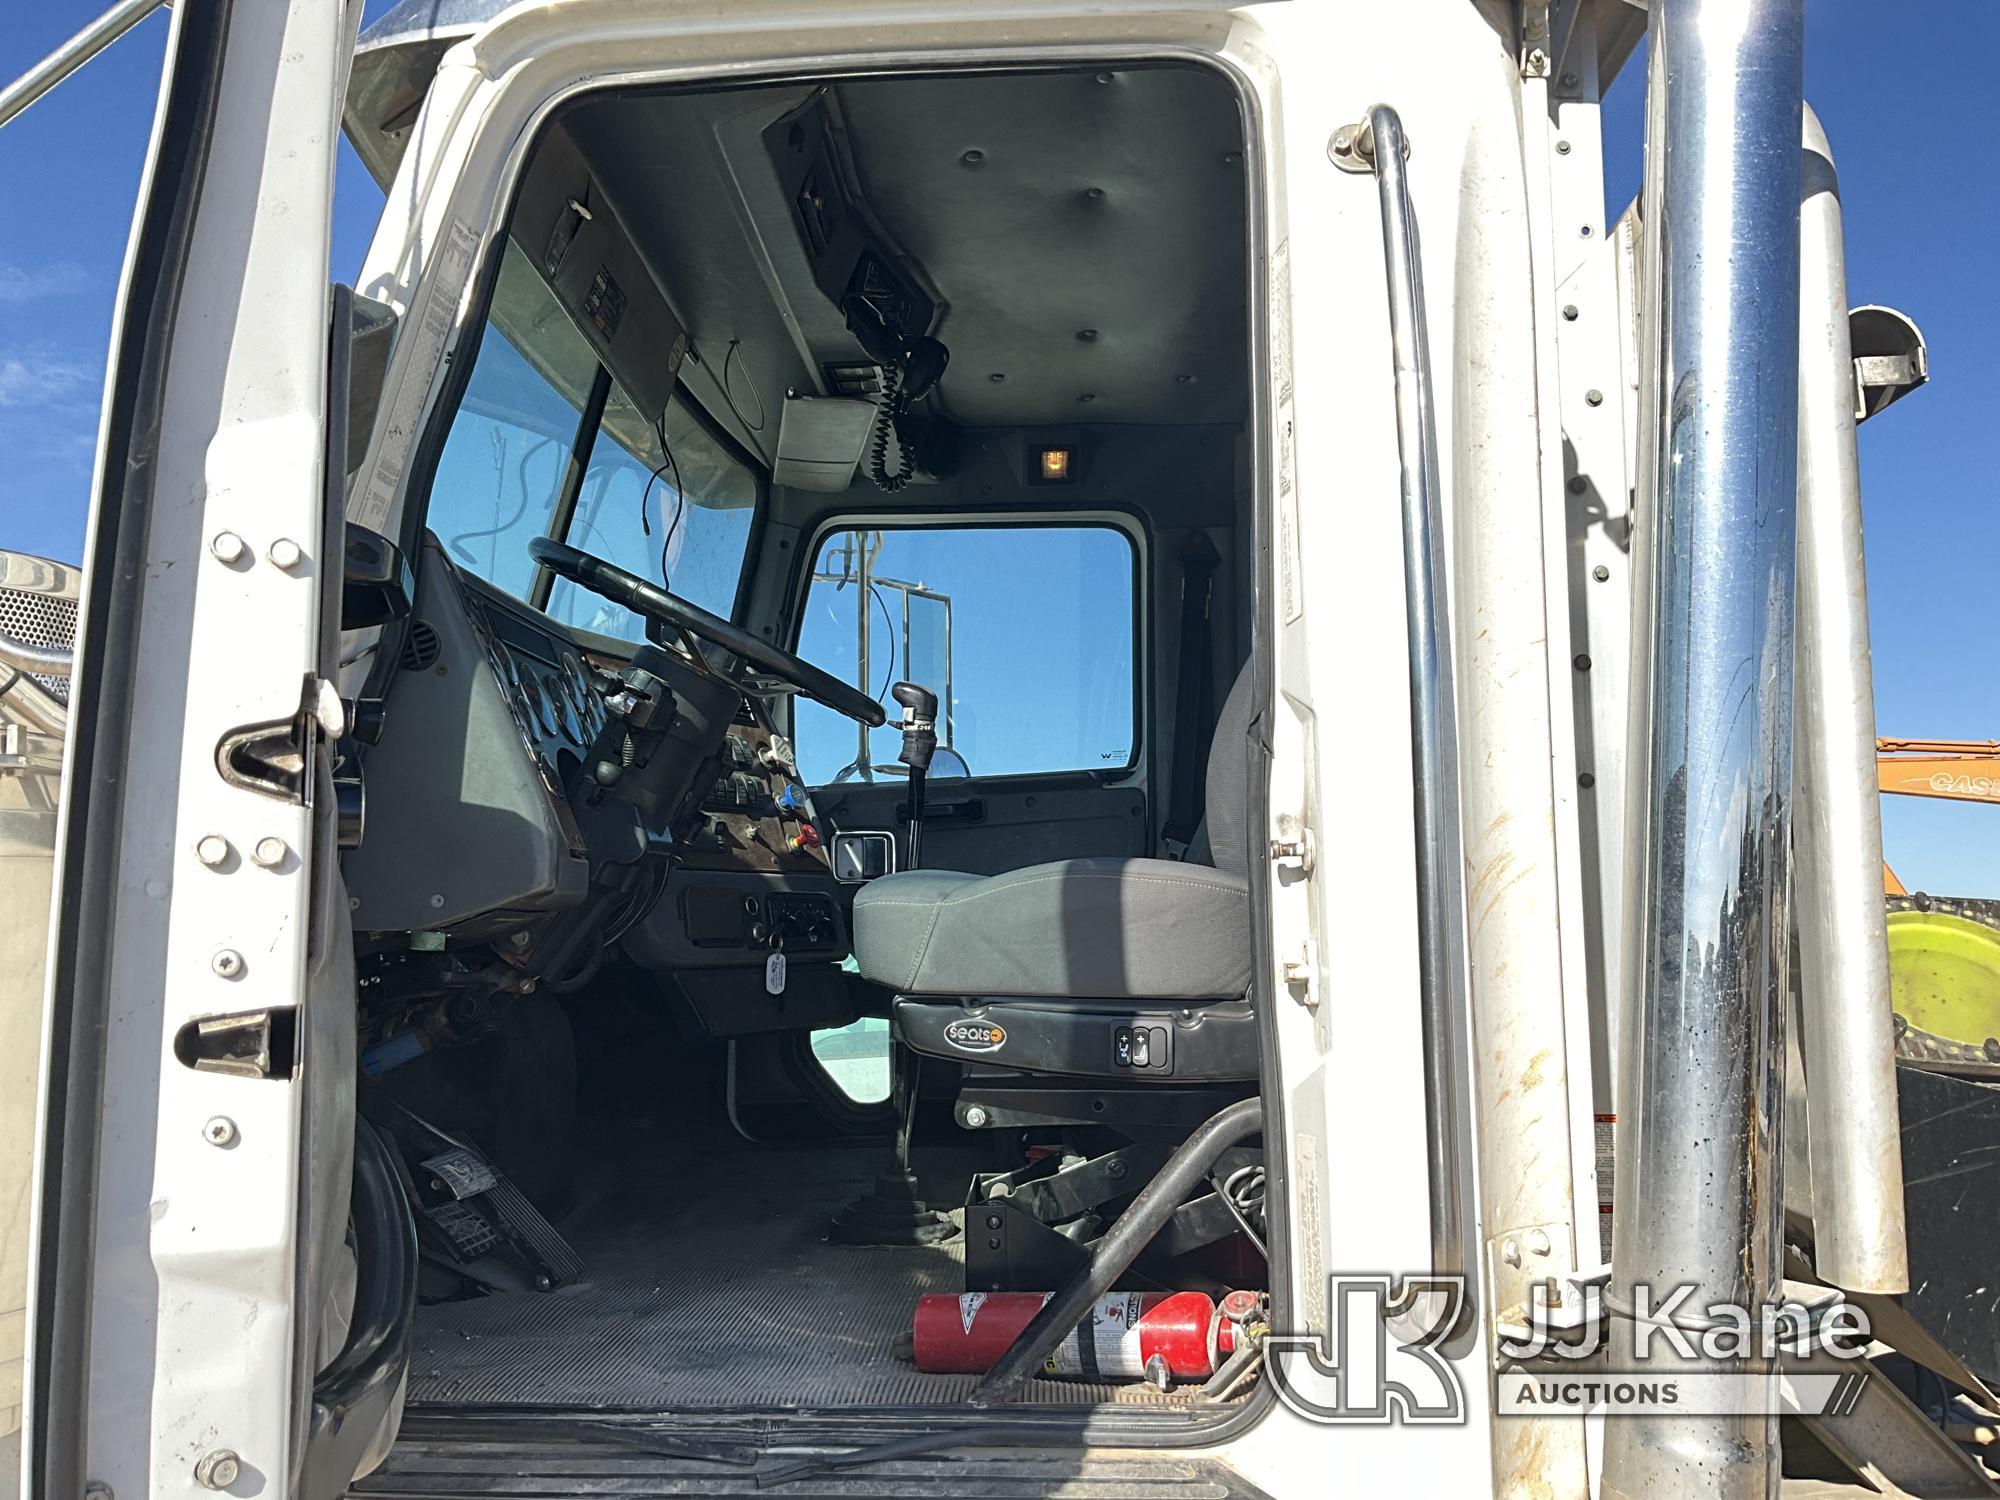 (San Angelo, TX) 2007 Western Star 4900FA 6x4 Truck Tractor Runs and Moves, Paint Damage